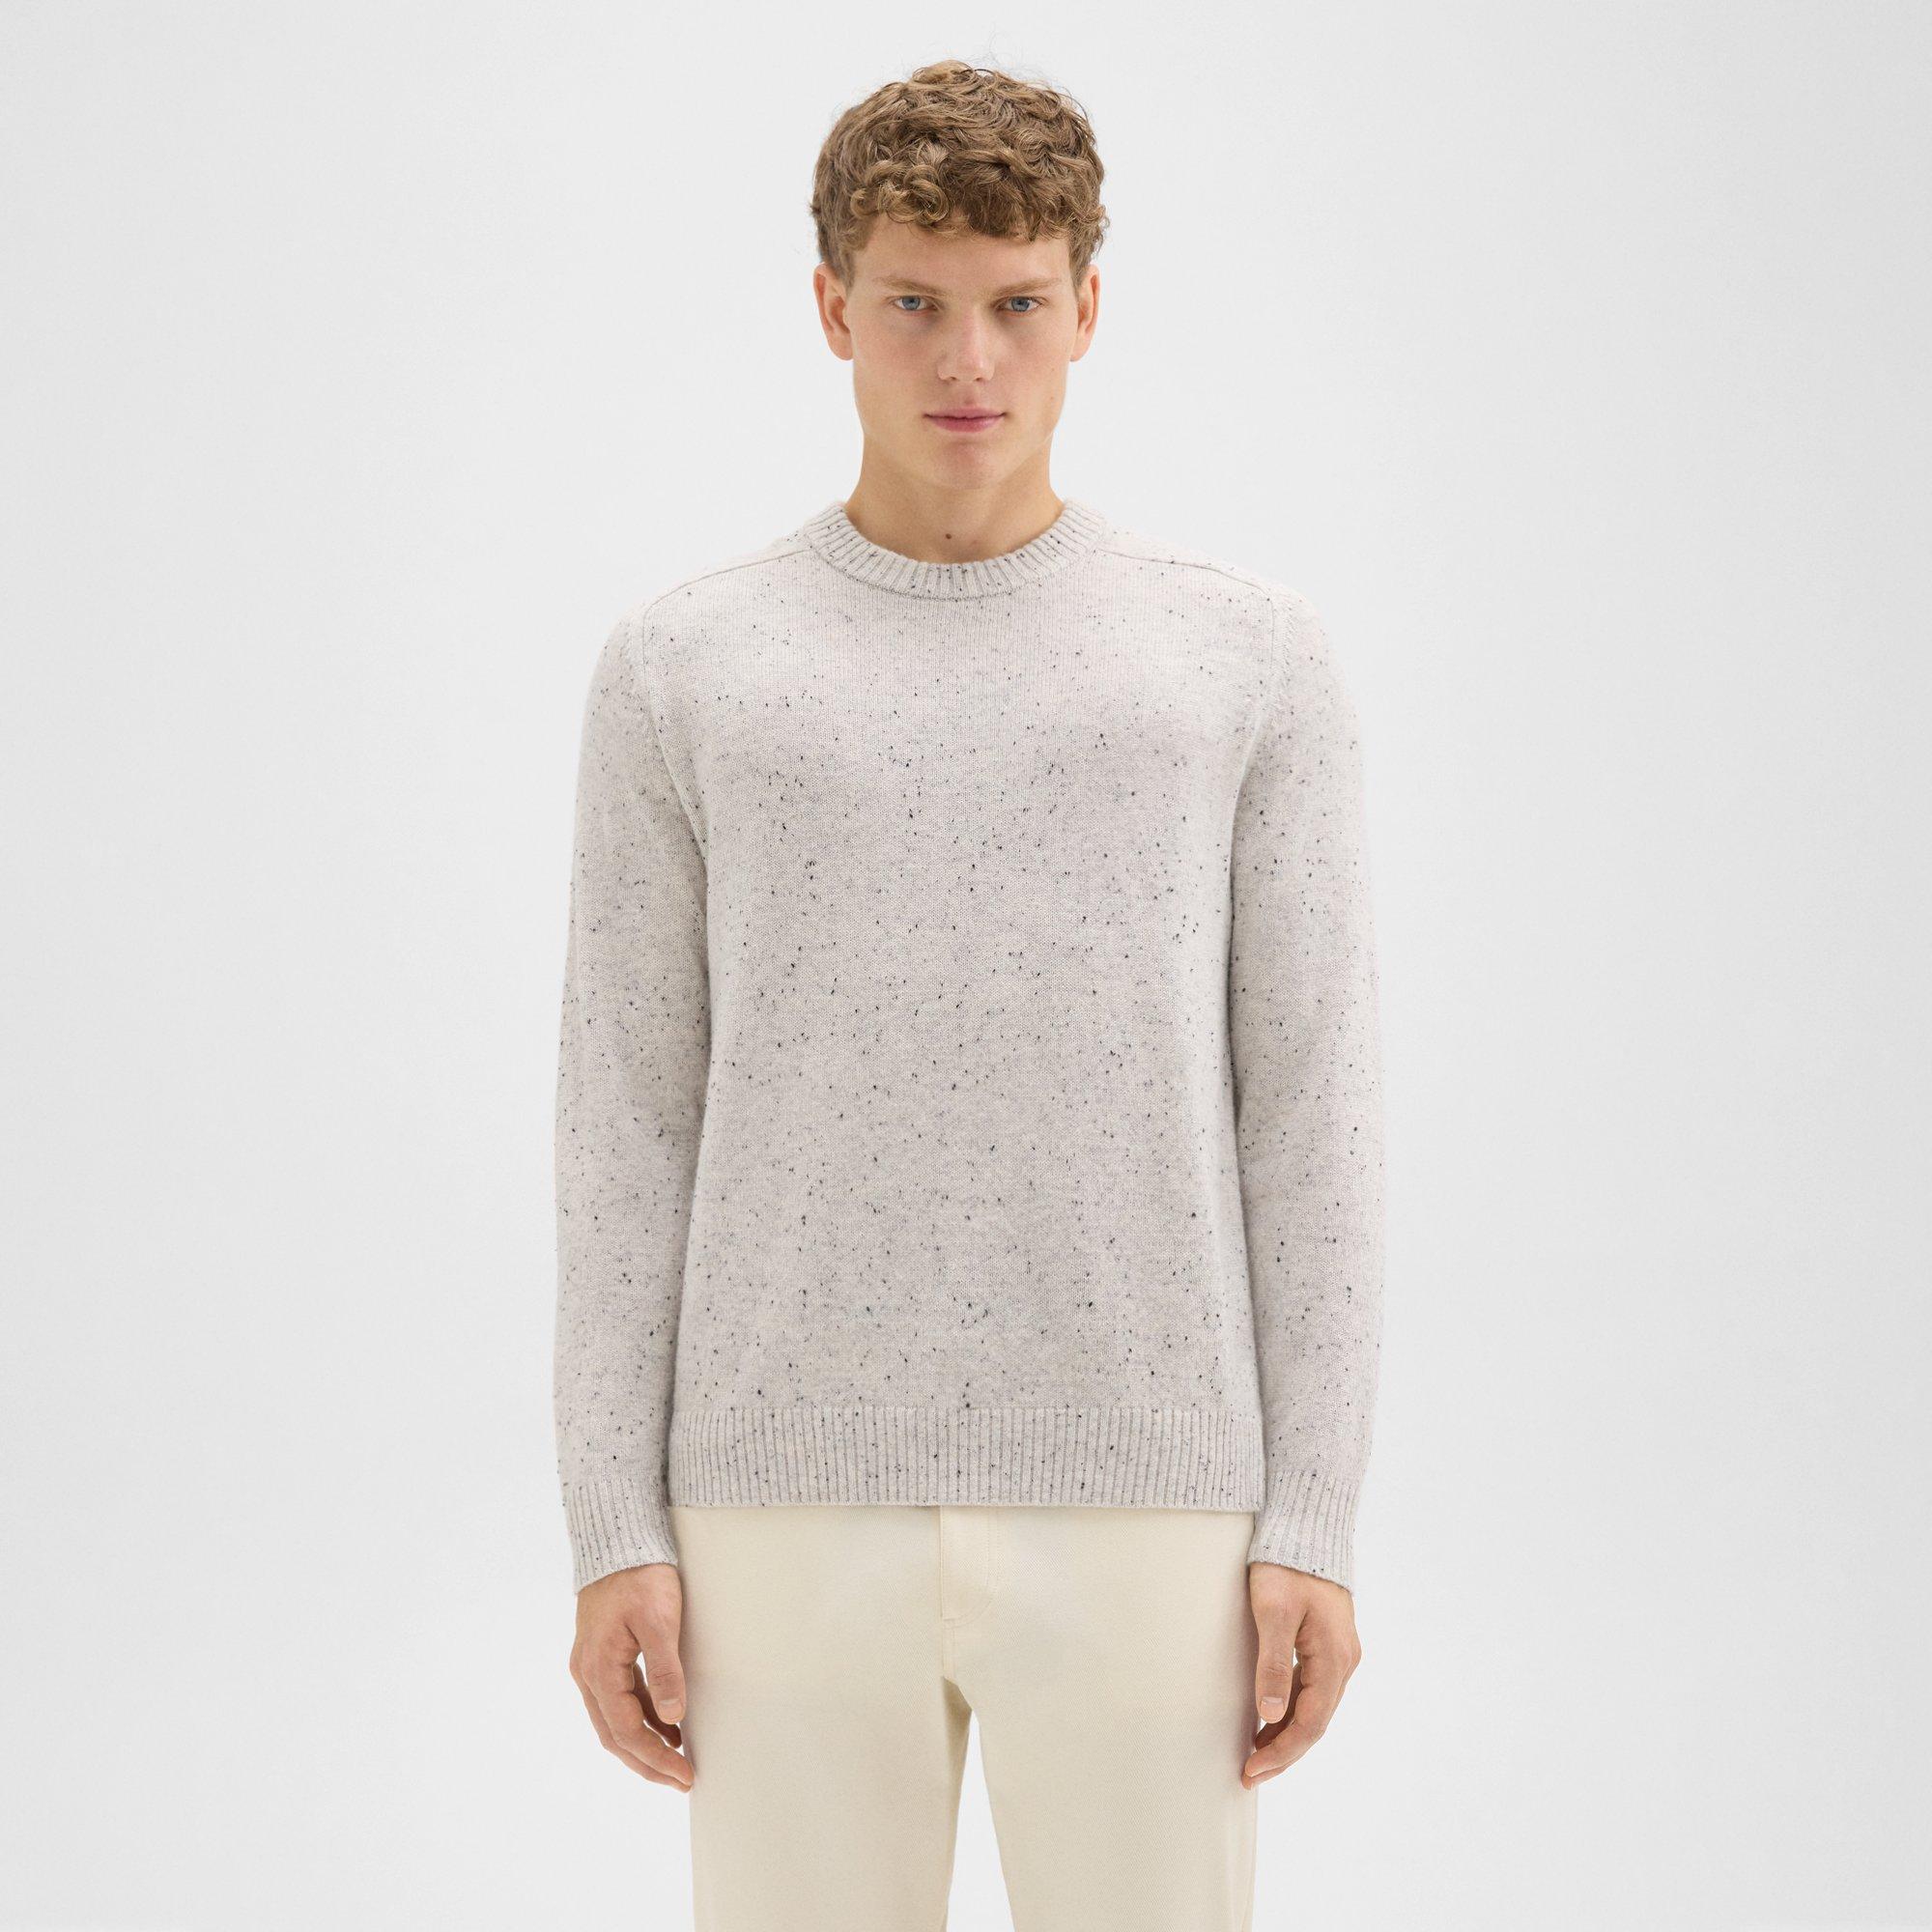 THEORY DININ CREWNECK SWEATER IN DONEGAL WOOL-CASHMERE